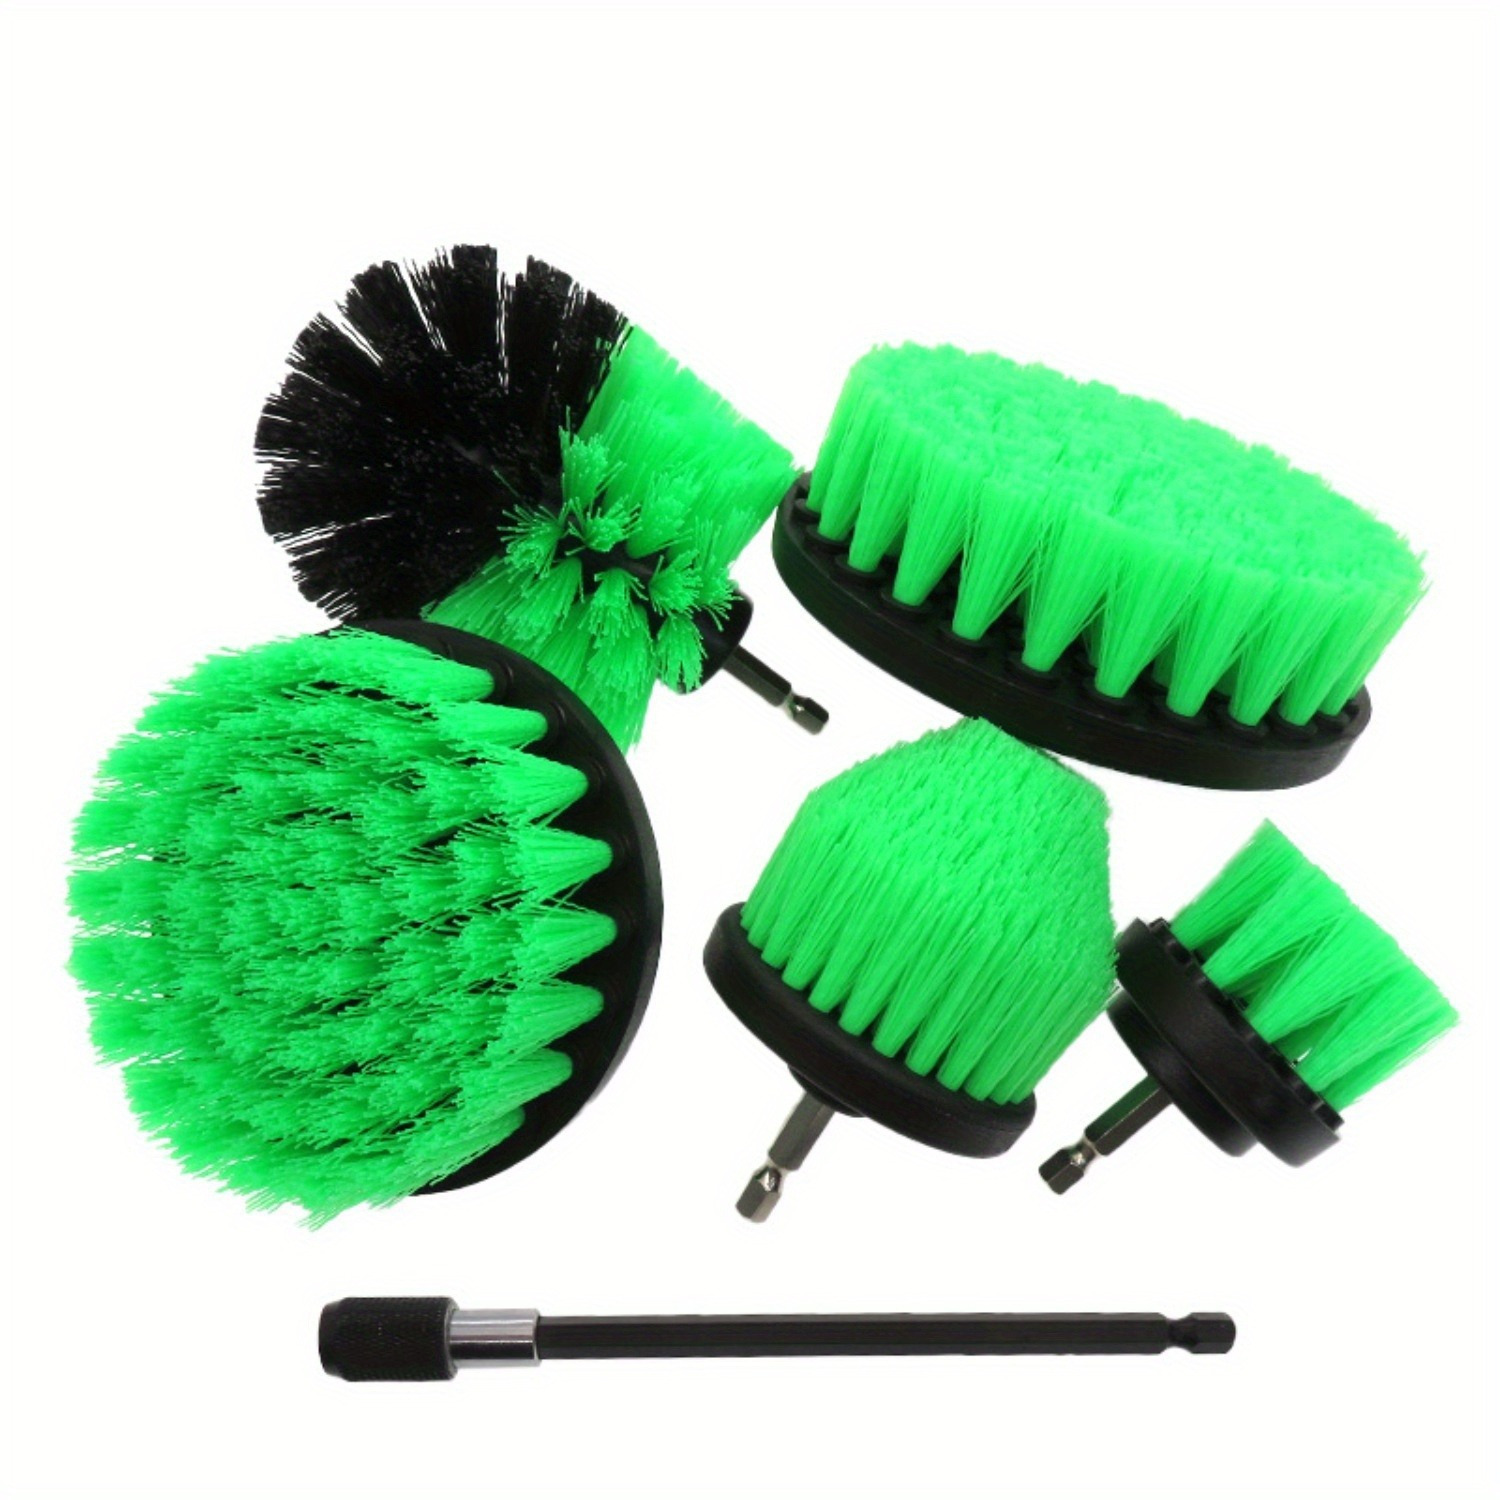 Electric Cleaning Brush, Light Green, Electric Drill Brush Head